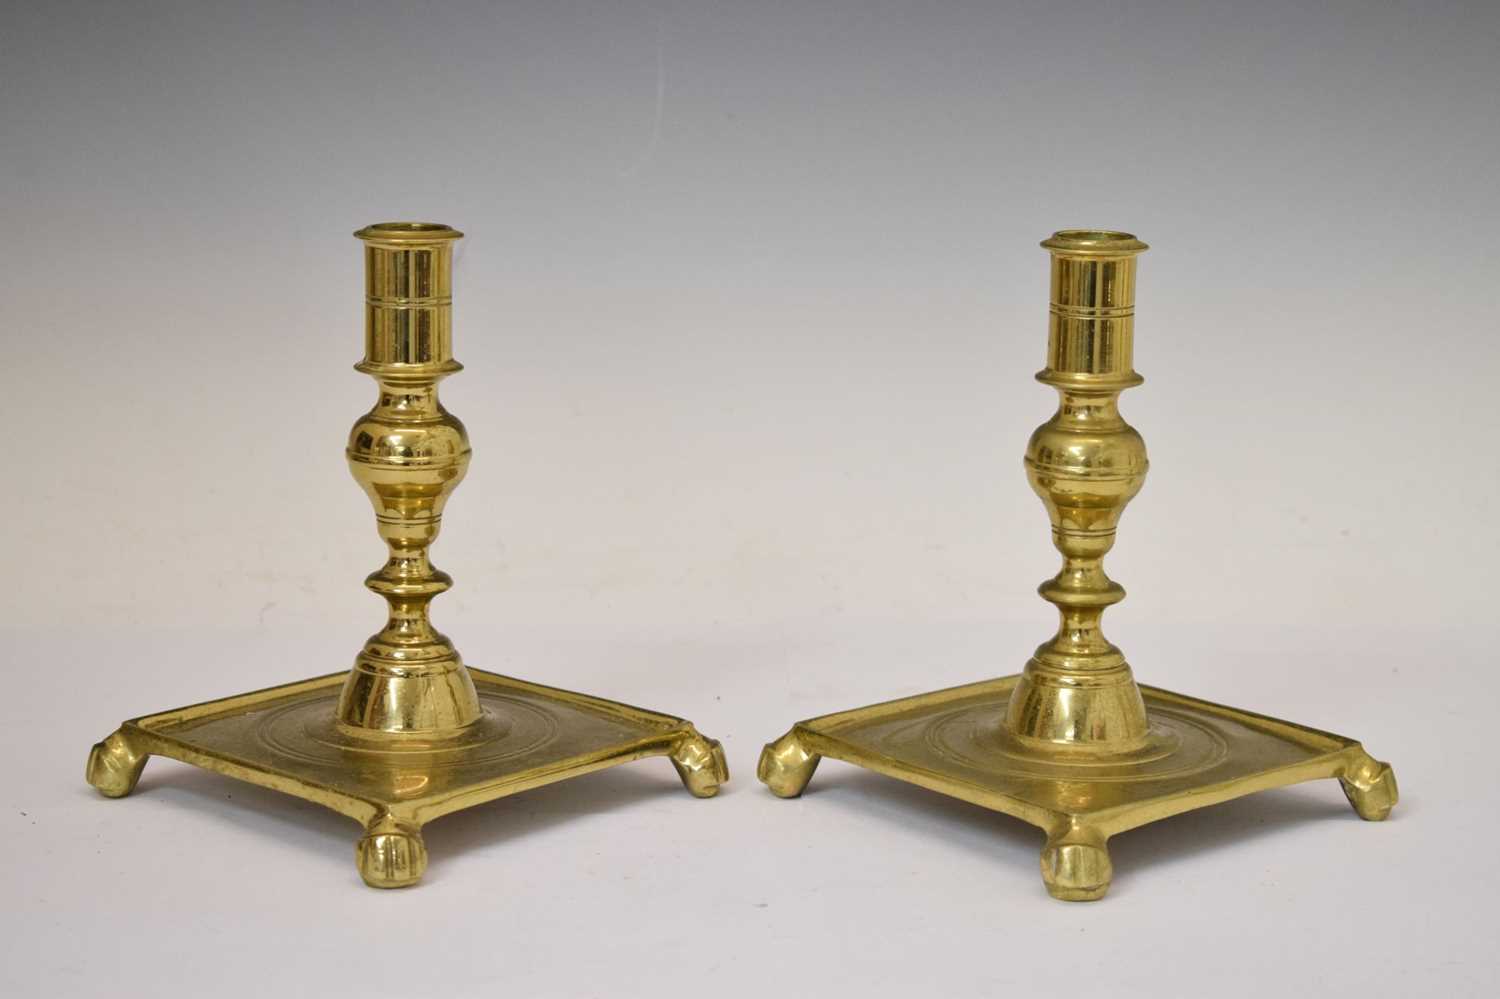 Four turned brass candlesticks - Image 5 of 5